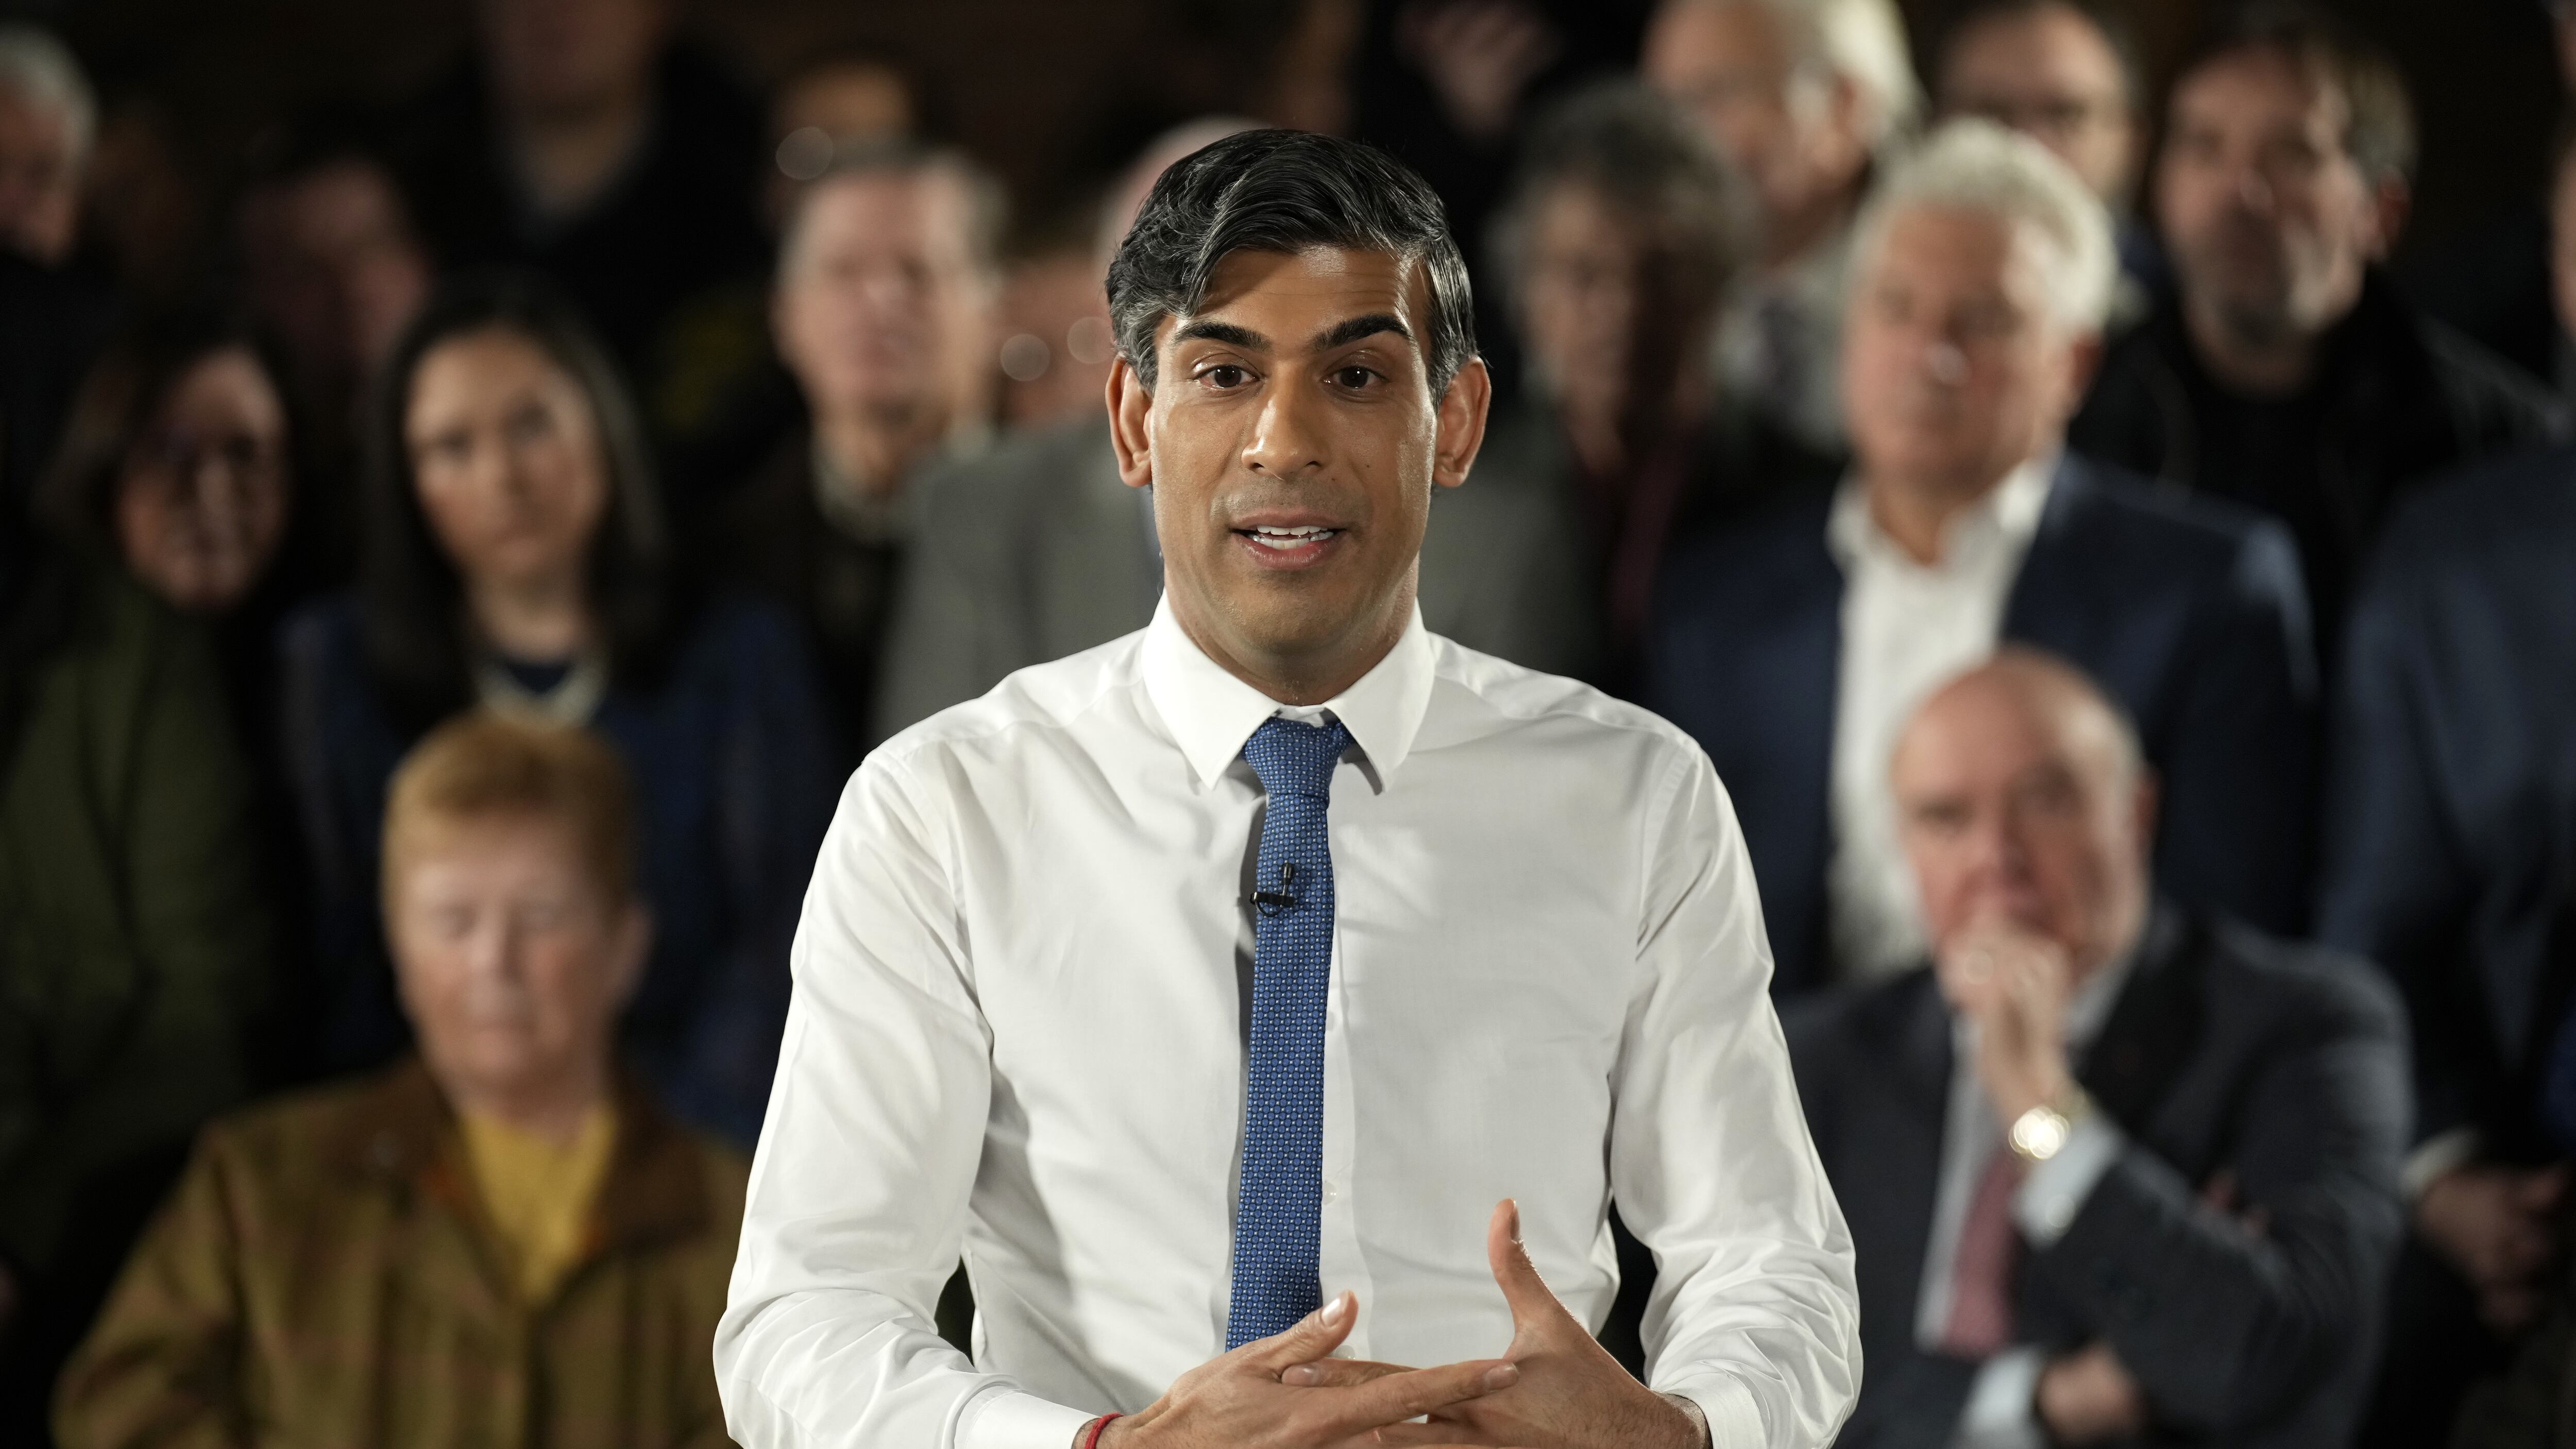 PM Rishi Sunak has vowed the Government will continue to invest in towns like Accrington and ensure they are not forgotten